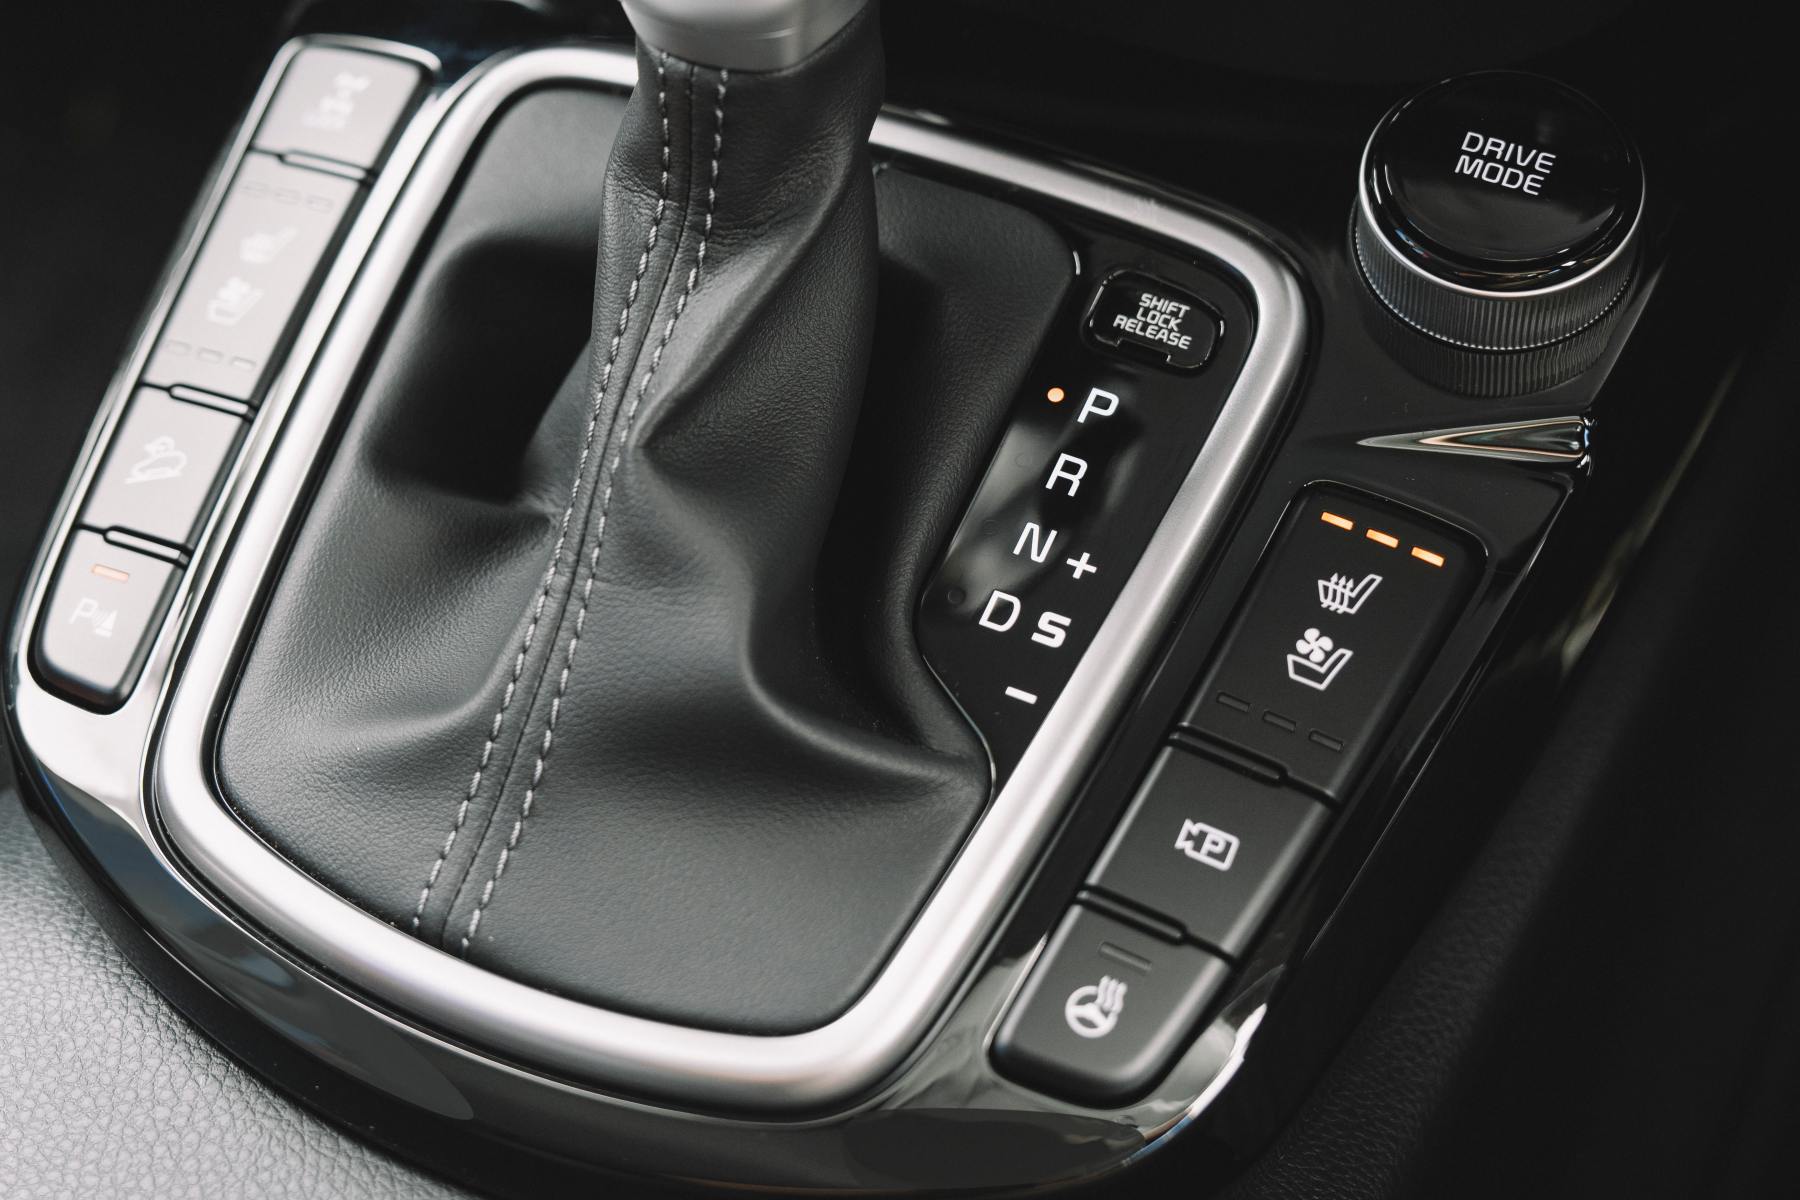 Kia Seltos GT-Line transmission drive mode and heated seats controls